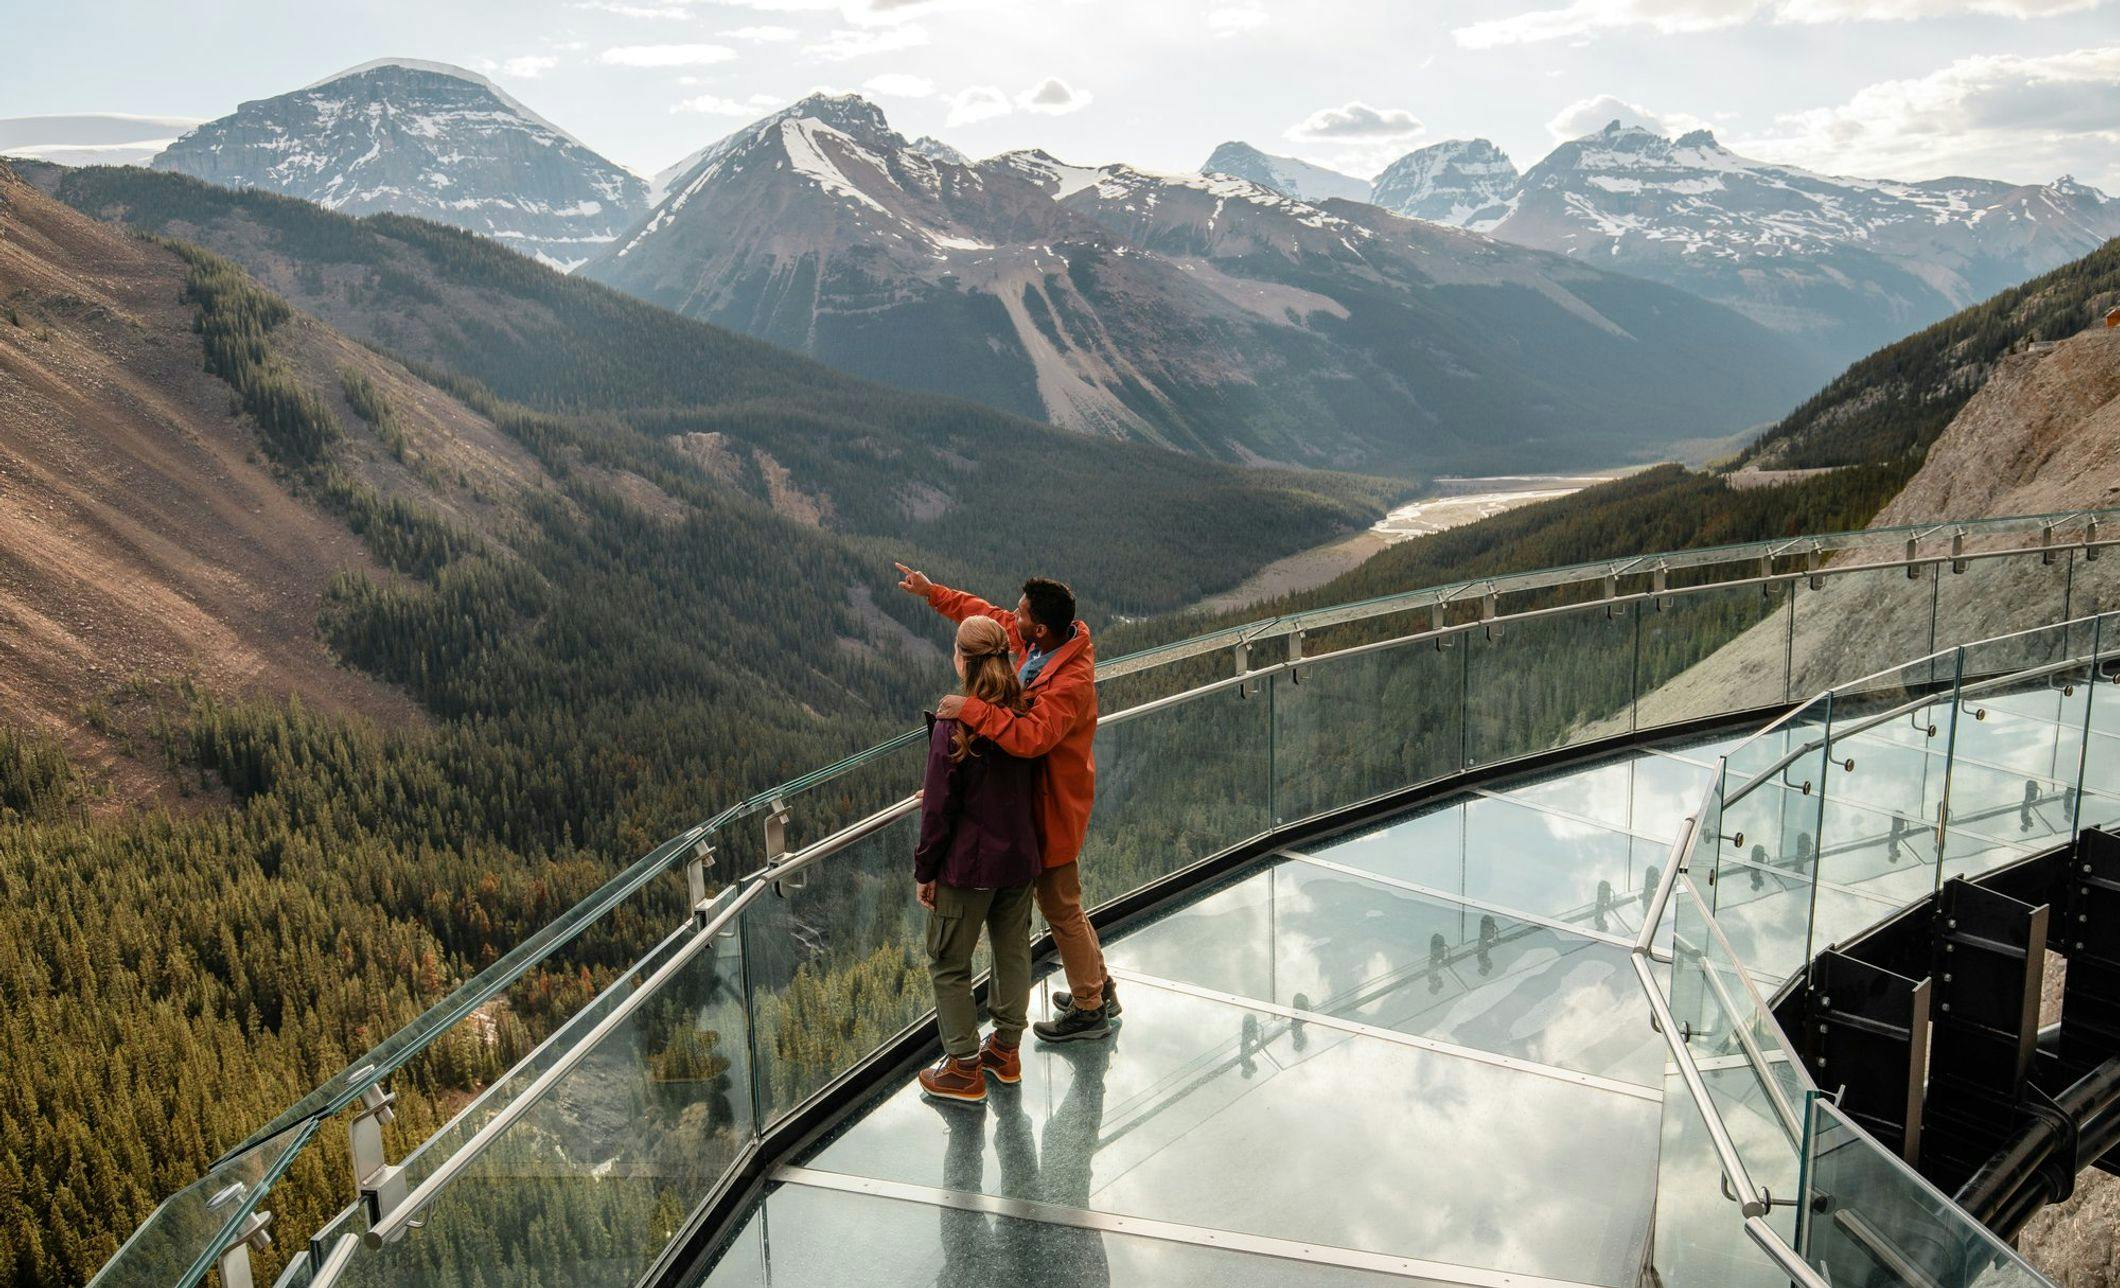 Couple standing on a glass skywalk overlooking mountains